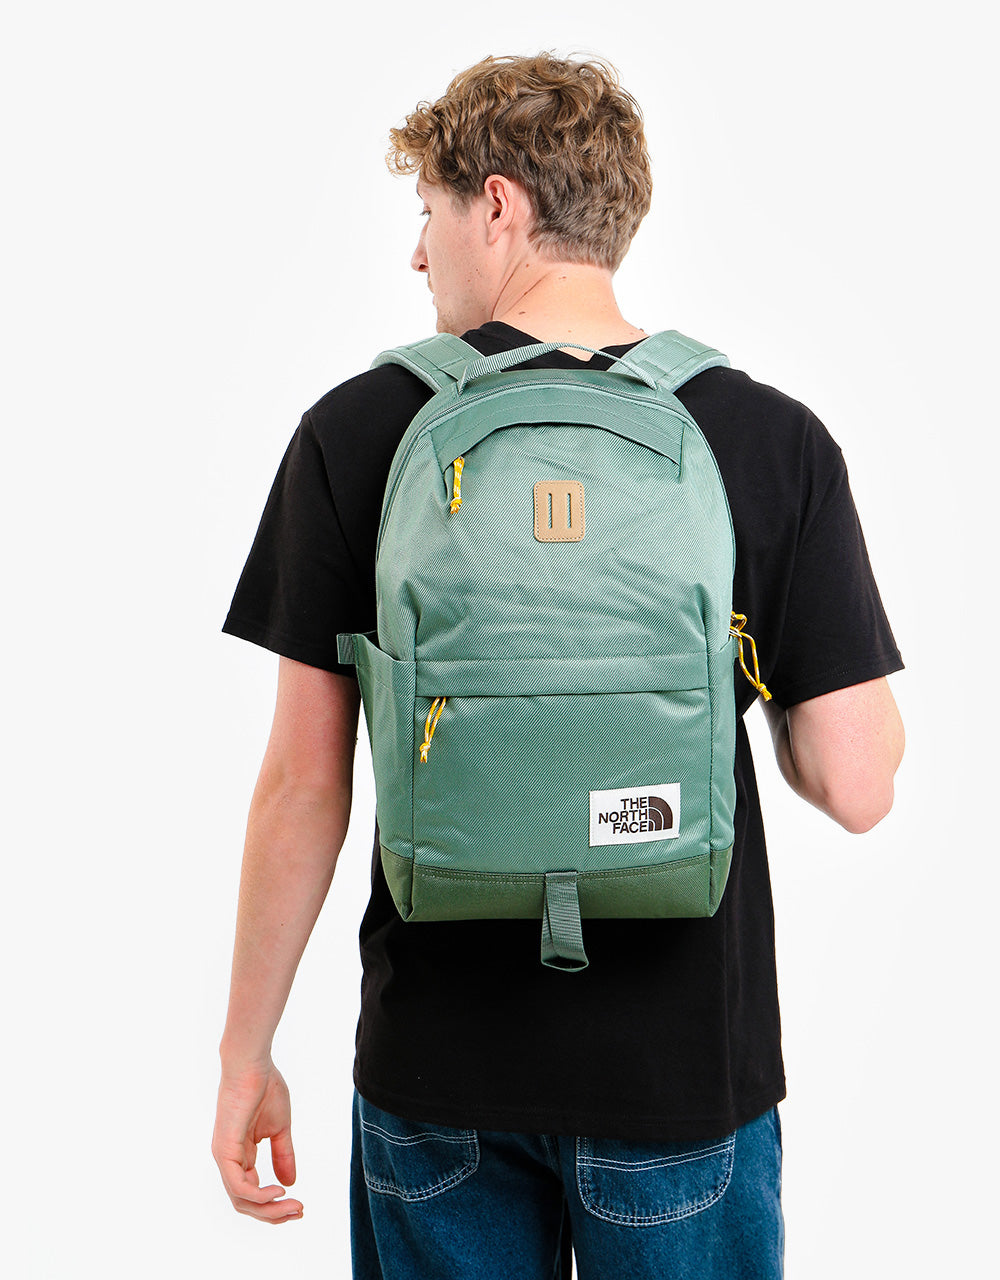 The North Face Daypack Backpack - Laurel Wreath Green/Thyme/Arrowwood